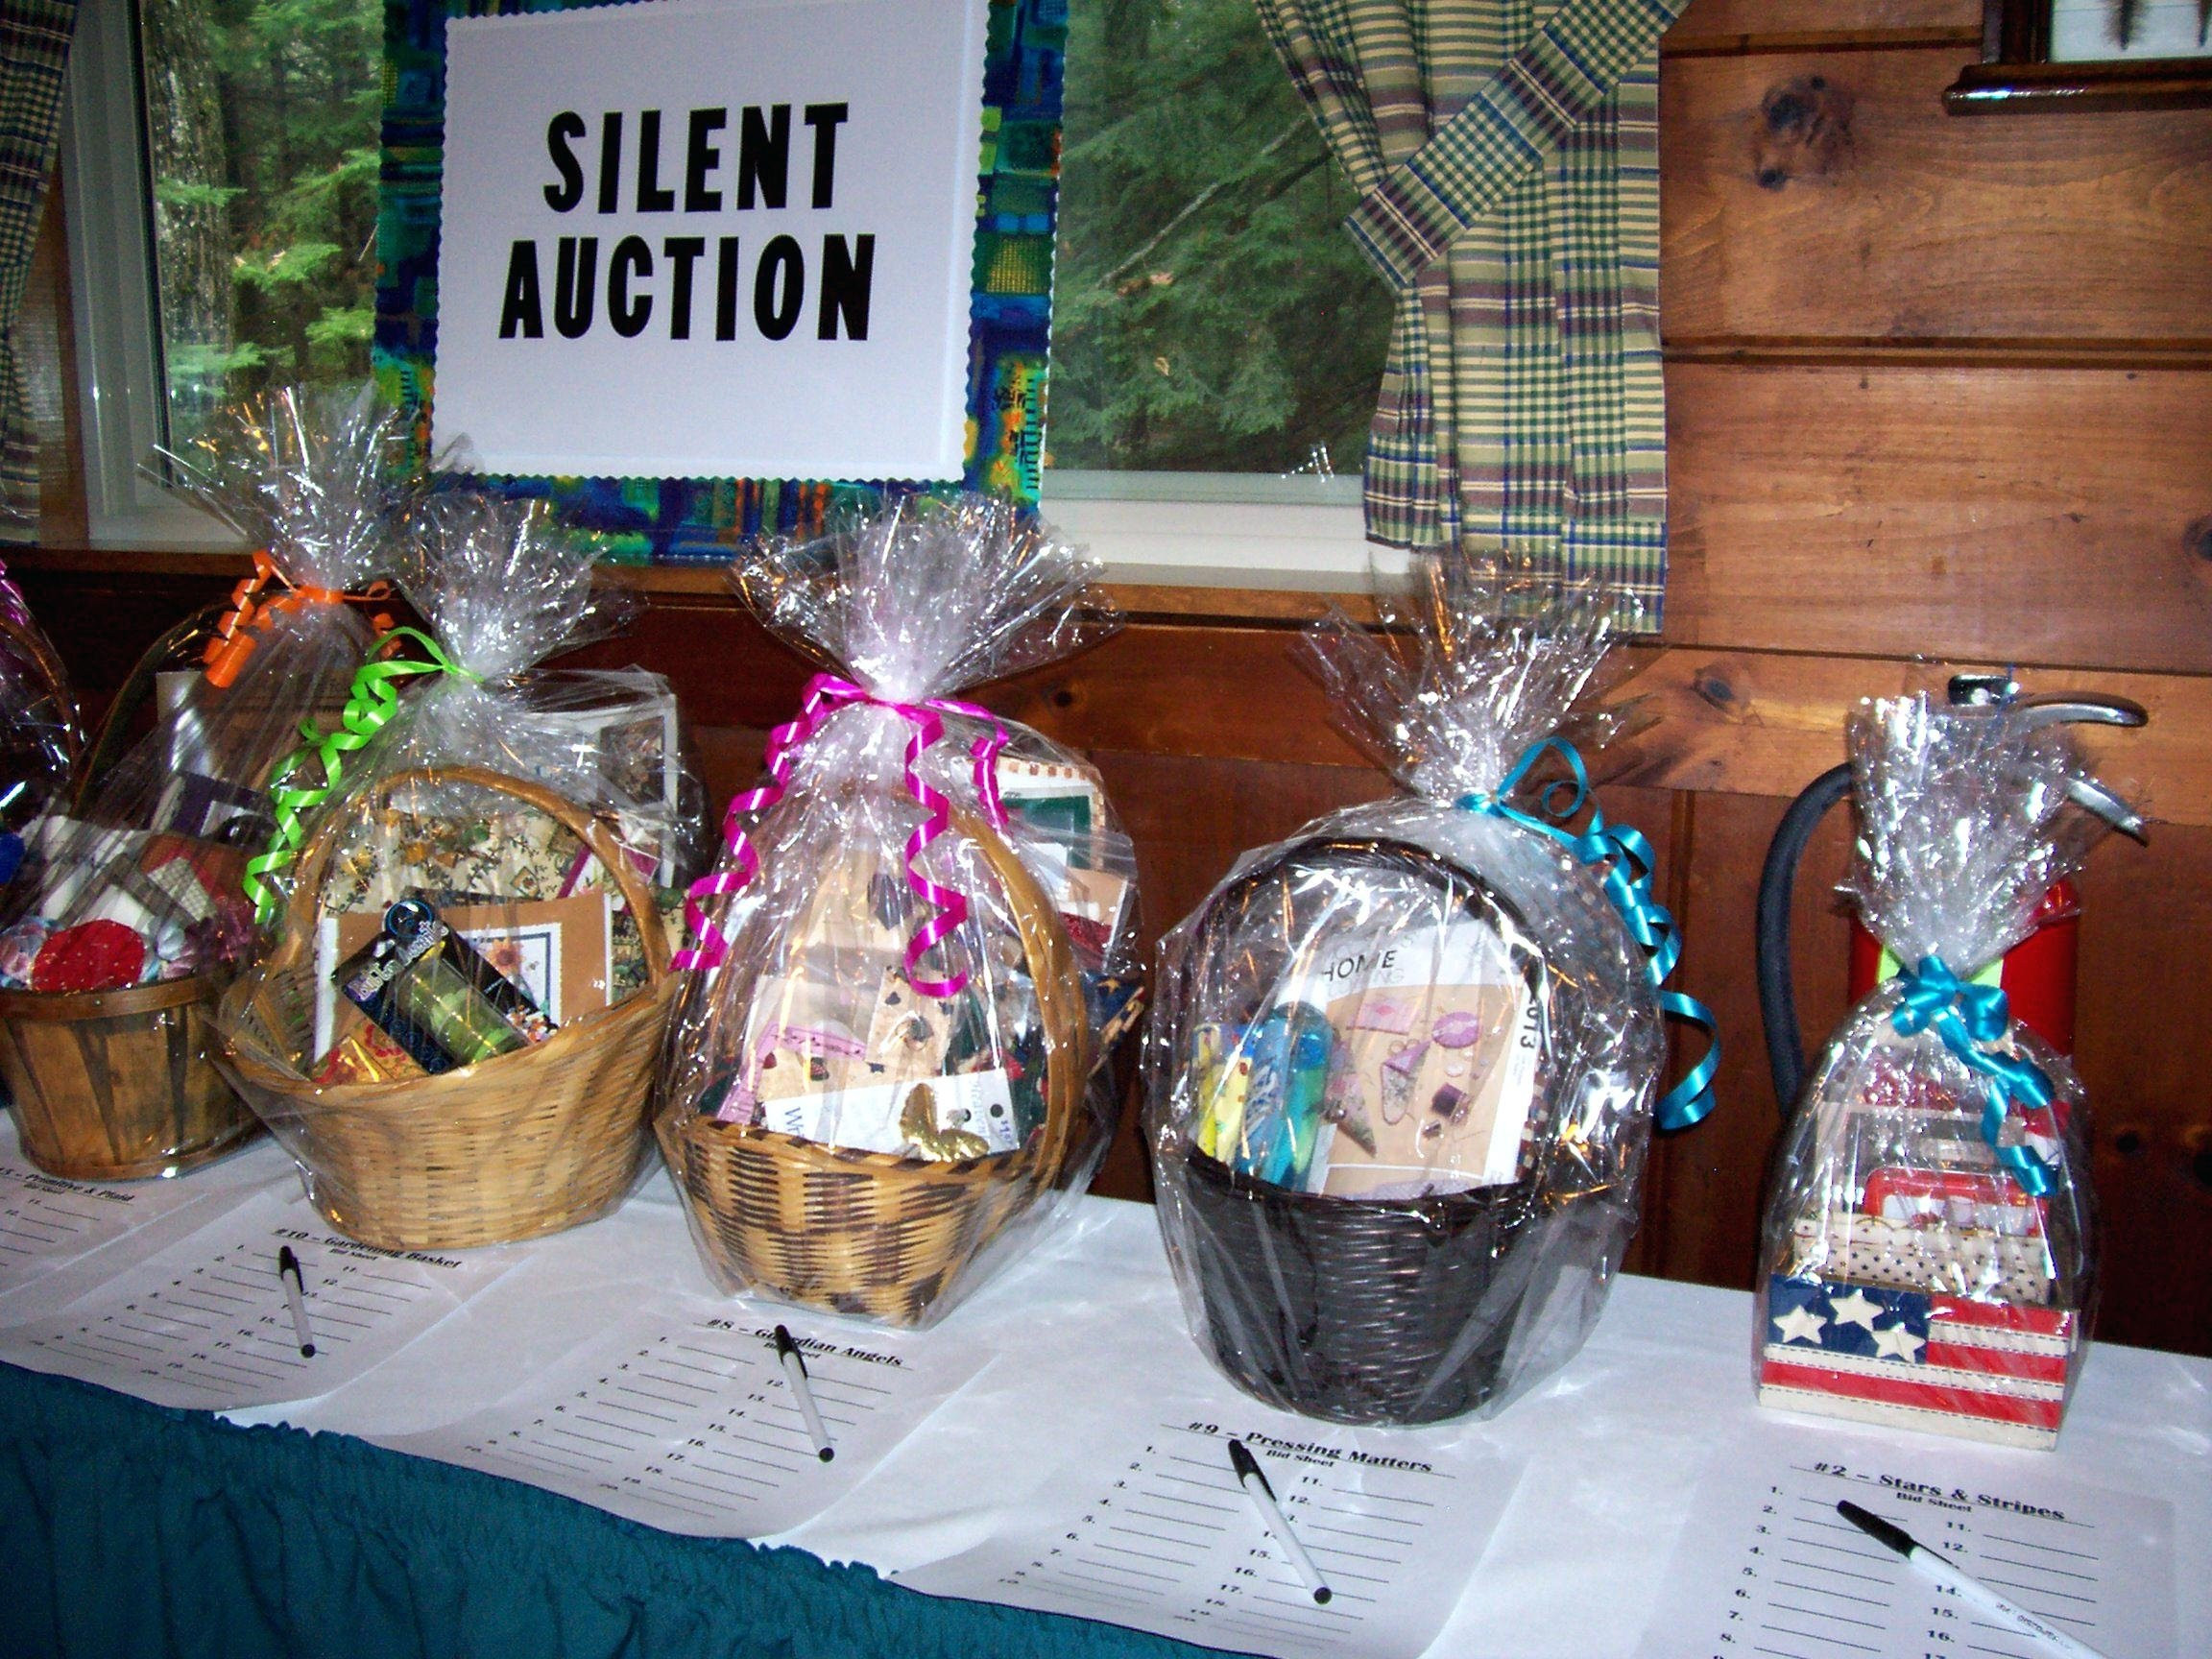 Themed Gift Basket Ideas For Auctions
 10 Cute Theme Basket Ideas For Silent Auction 2019